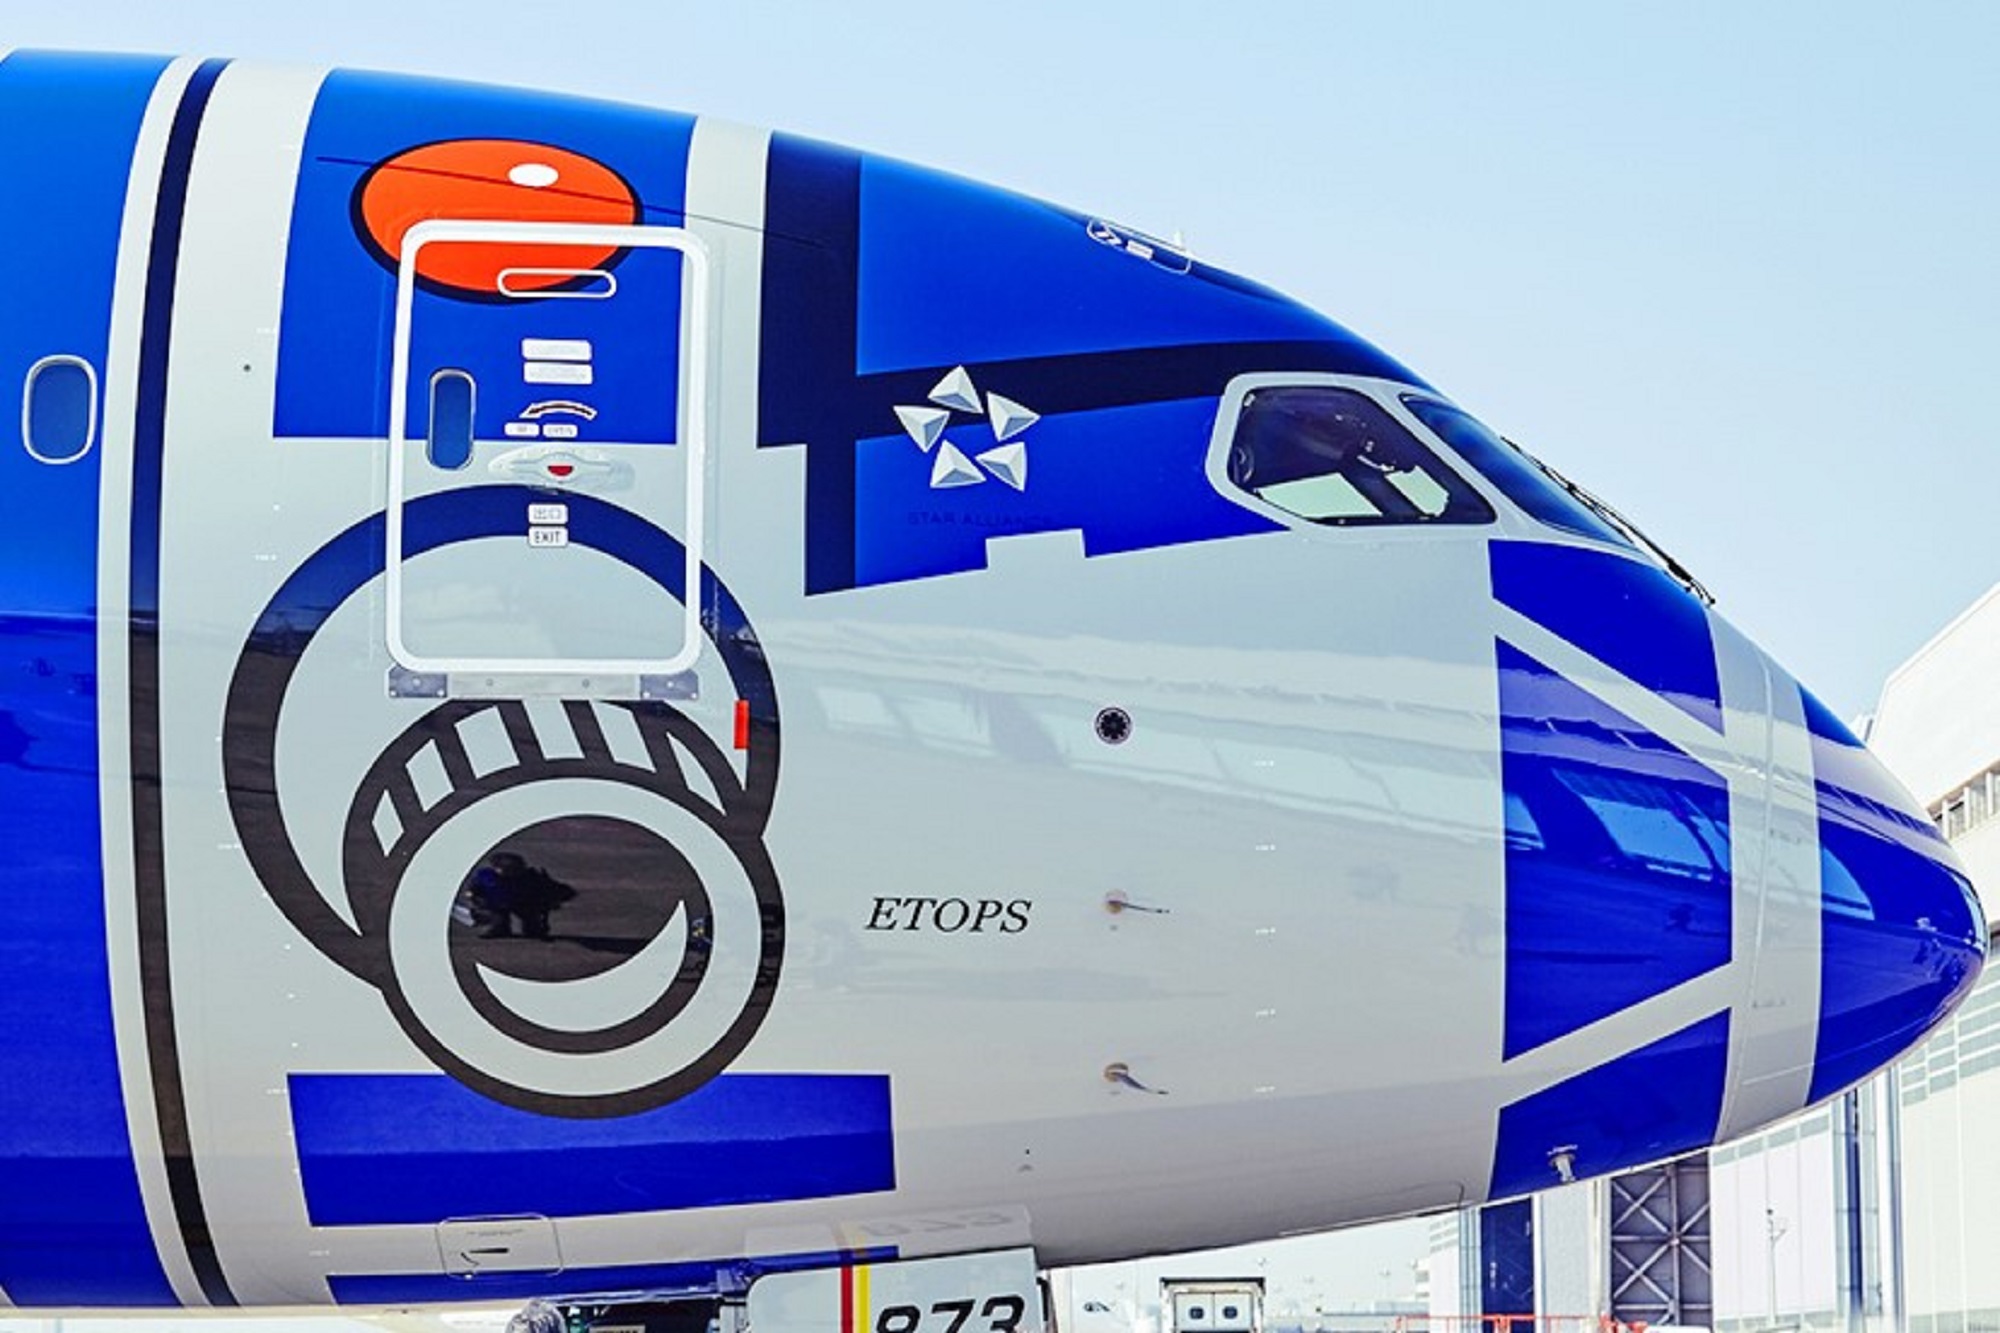 The Ultimate Star Wars Themed Jet Liveries Ever Spotted